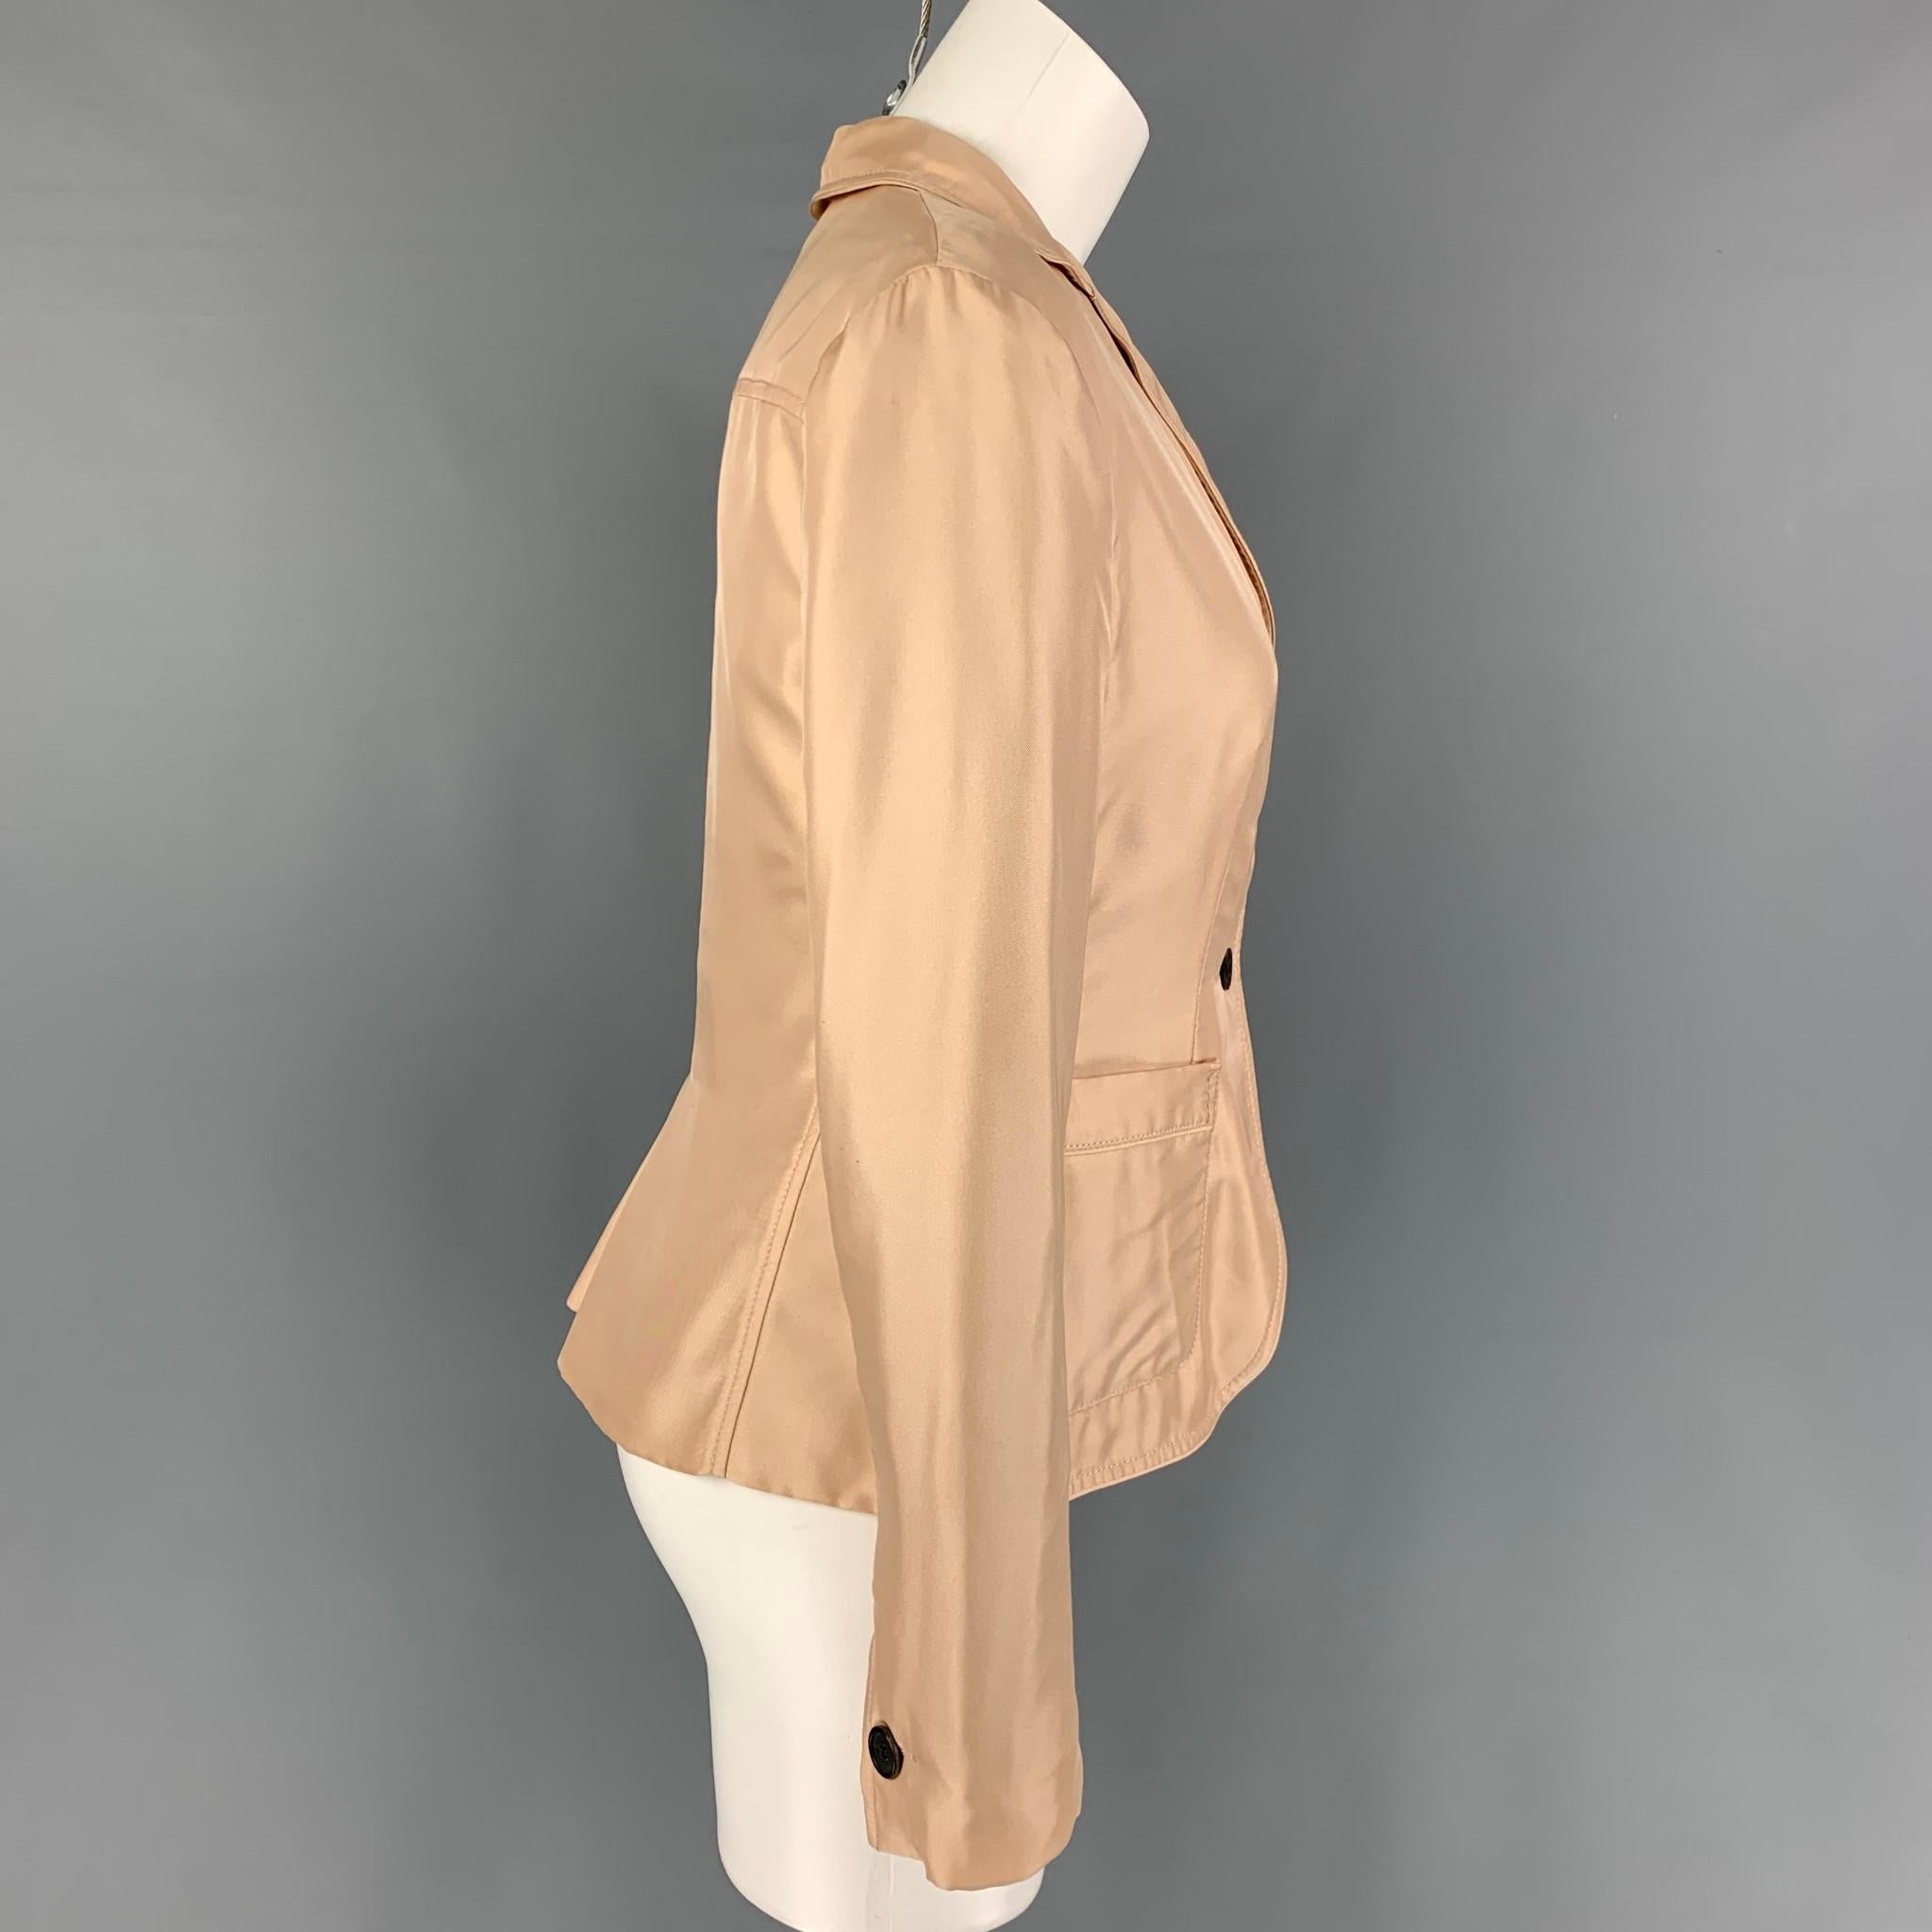 PRADA jacket comes in a blush silk featuring a notch lapel, patch pockets, single back vent, and a three button closure. Made in Italy. 

Good Pre-Owned Condition. Light marks at back. As-Is.
Marked: 40

Measurements:

Shoulder: 16 in.
Bust: 36